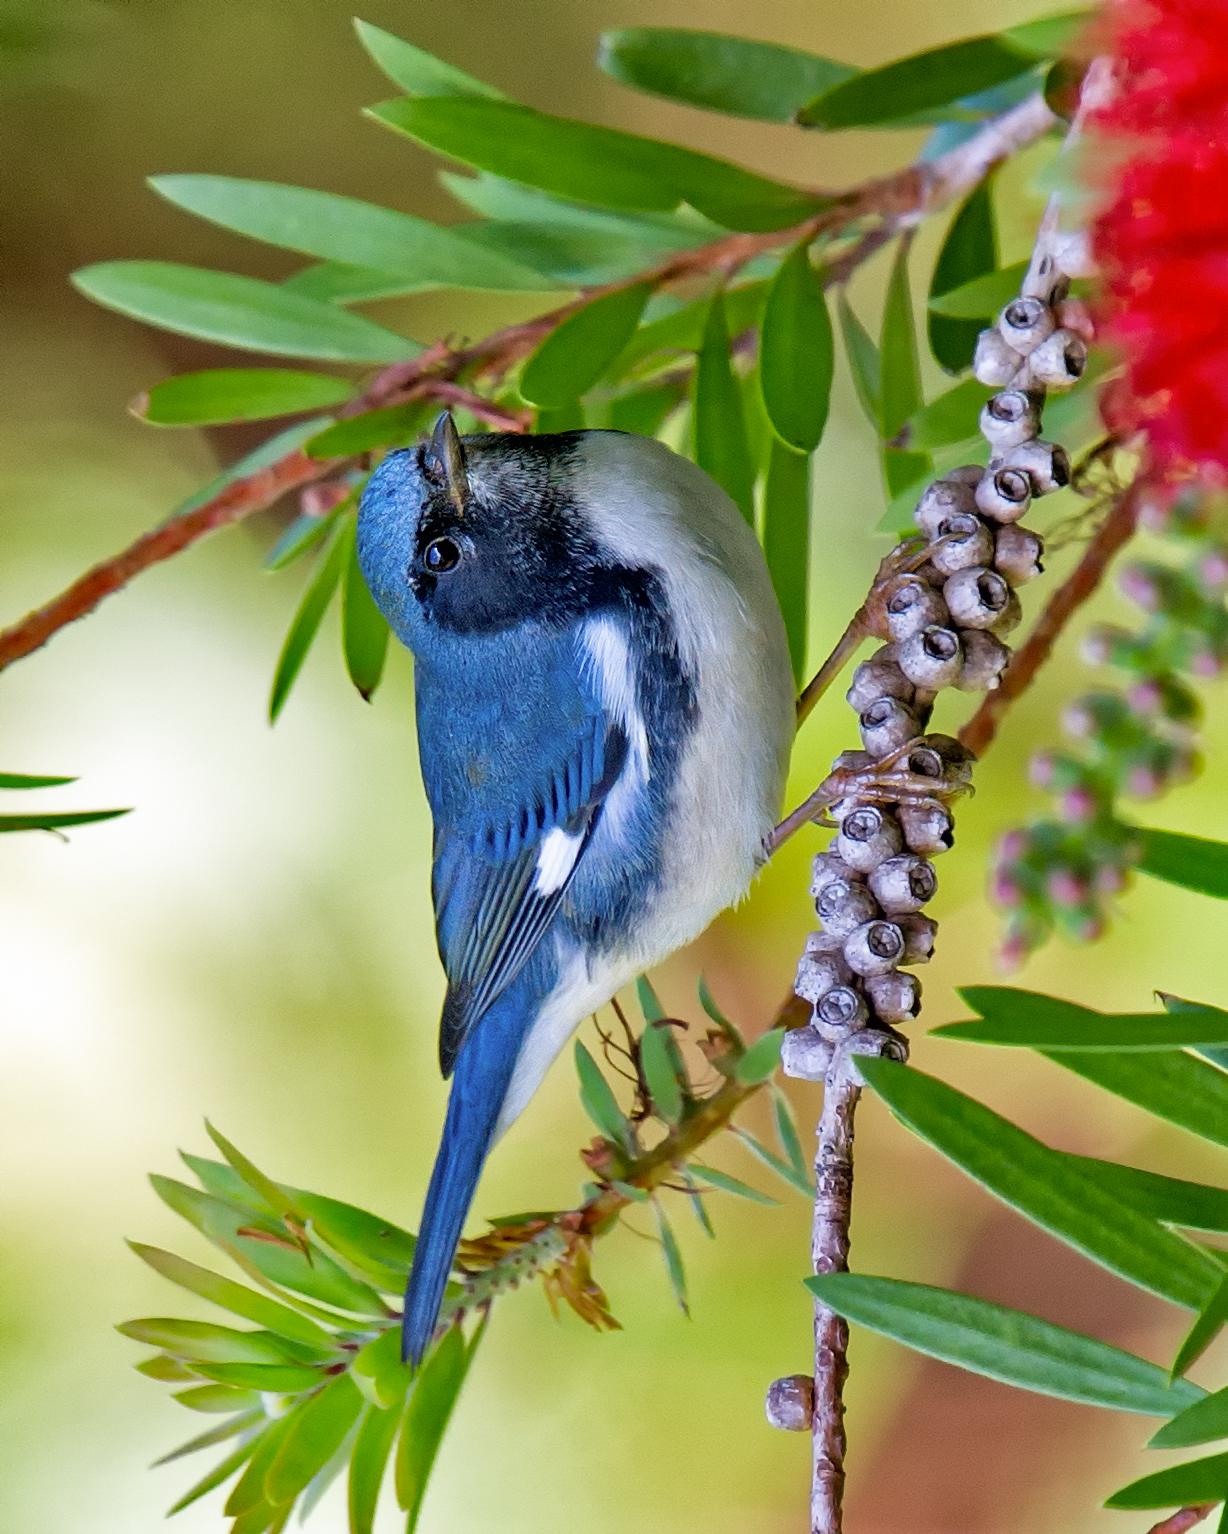 Black-throated Blue Warbler Photo by JC Knoll